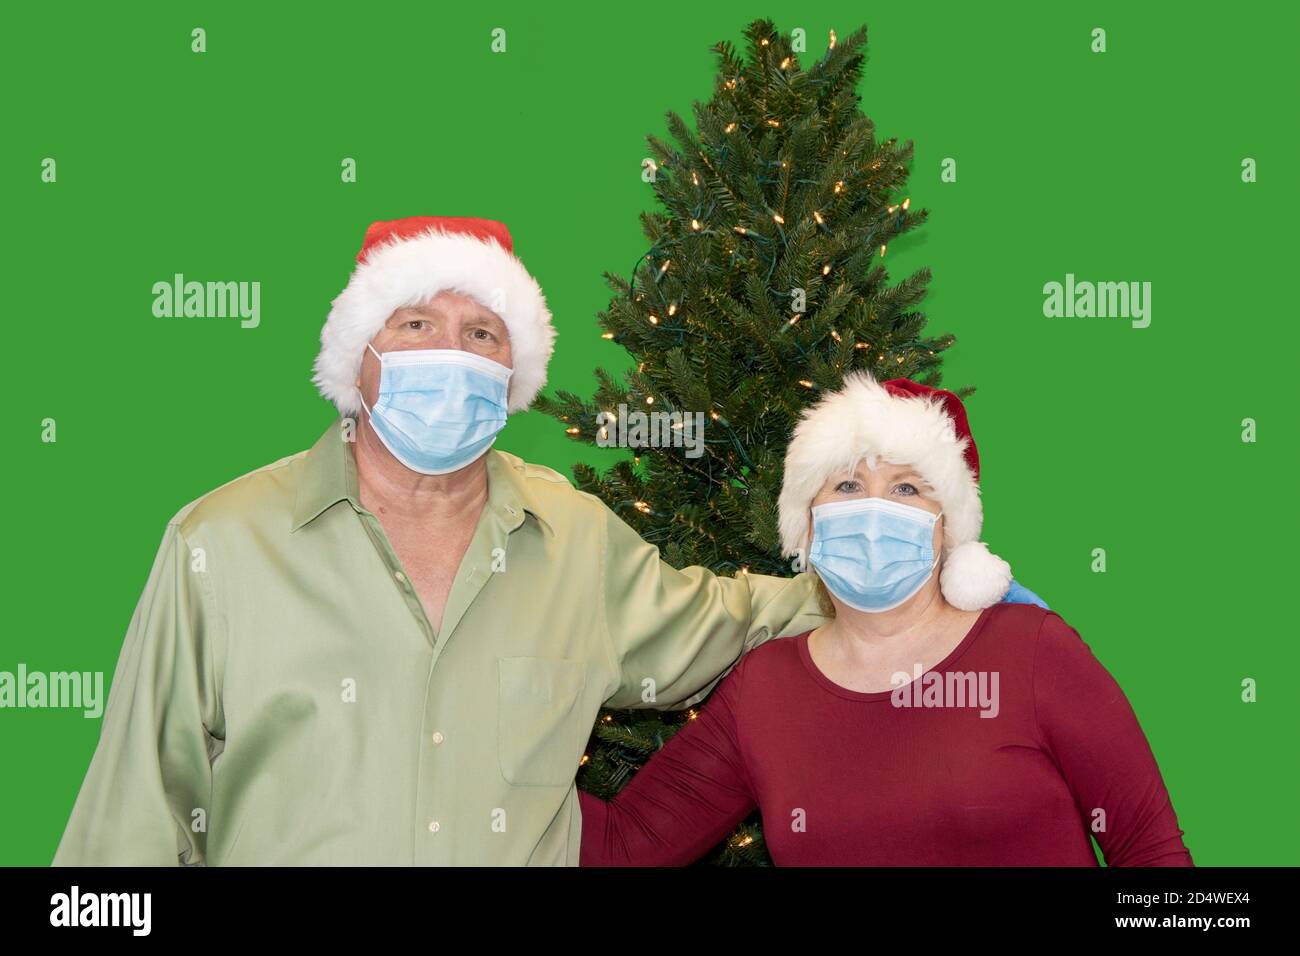 Older couple dressed in stocking hats wearing masks posing in front of Christmas tree with copy space on green screen. Stock Photo